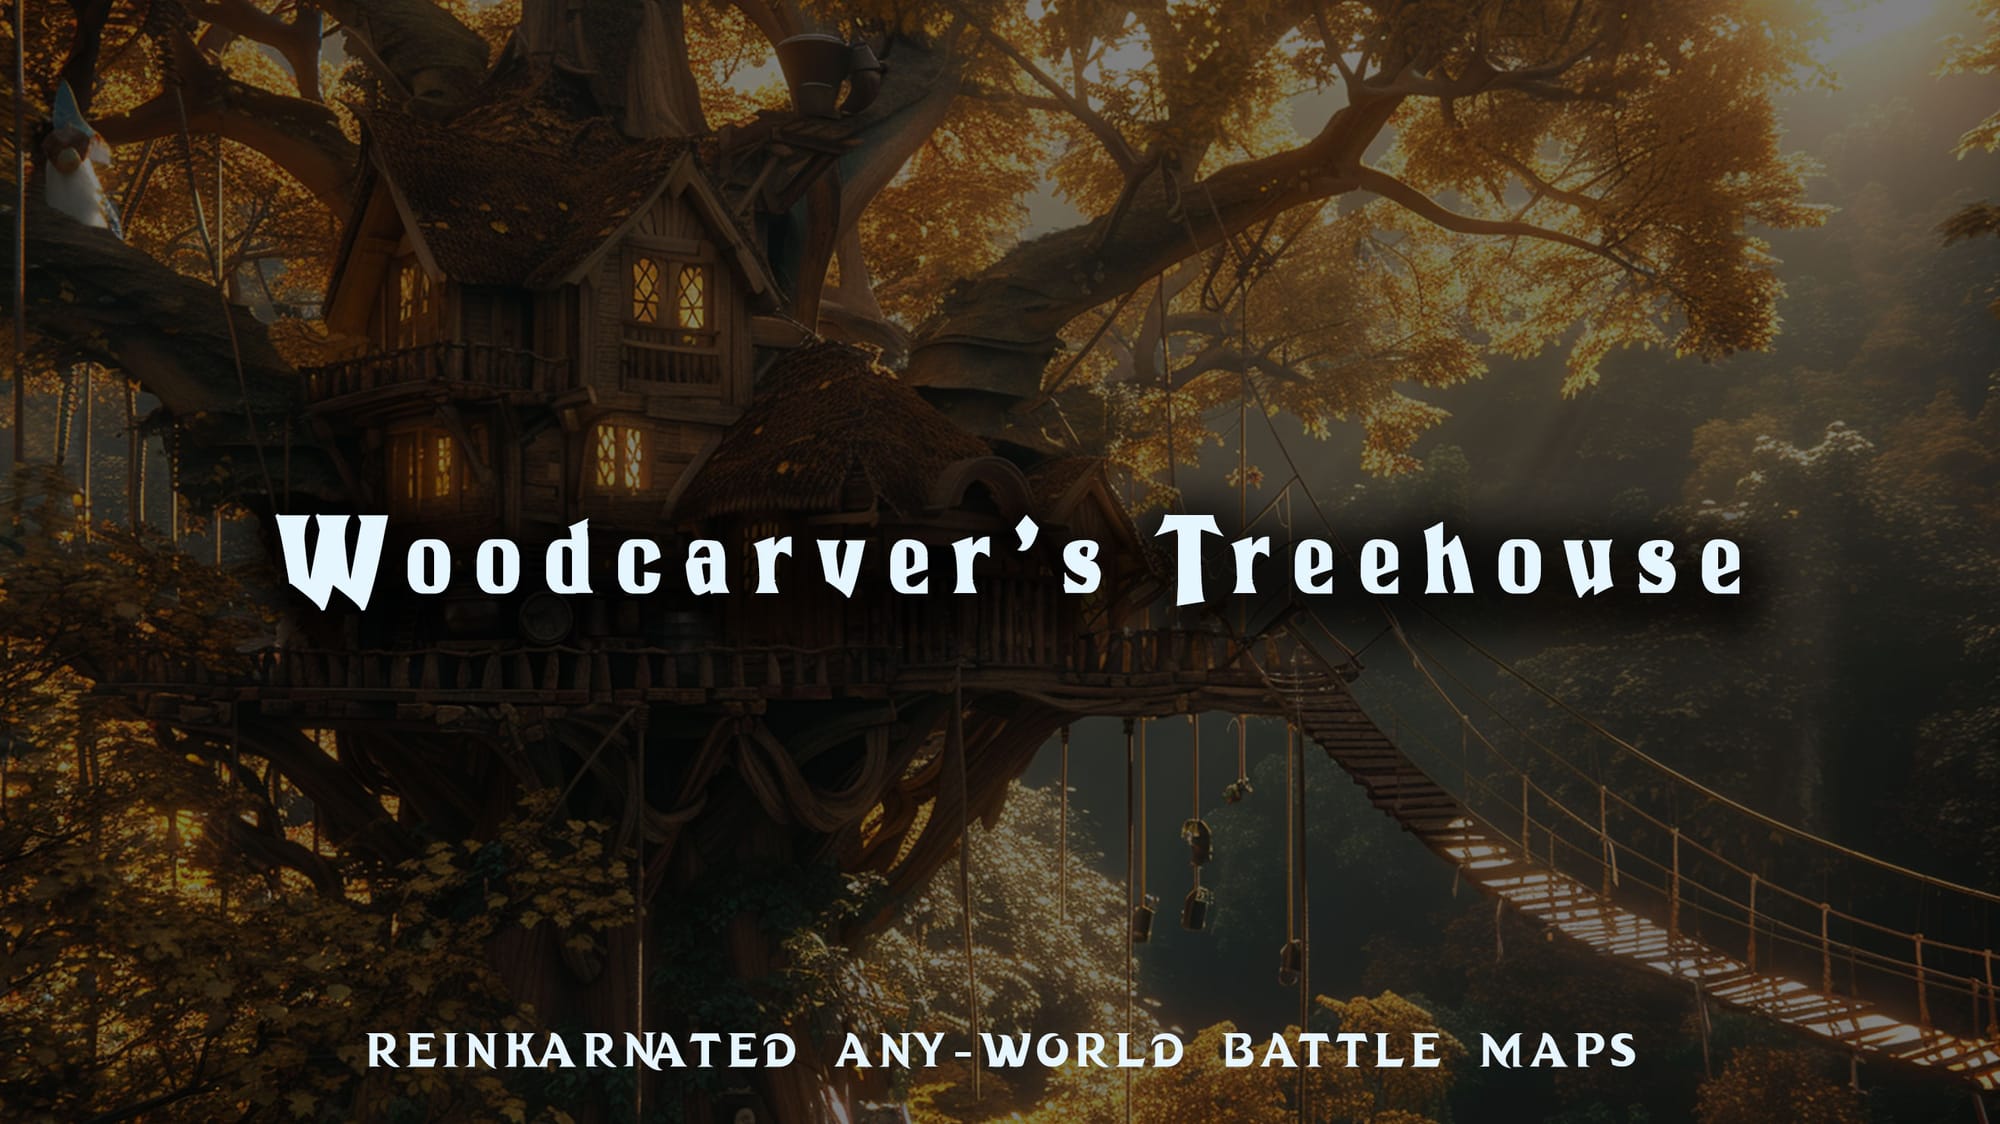 Woodcarver's Treehouse